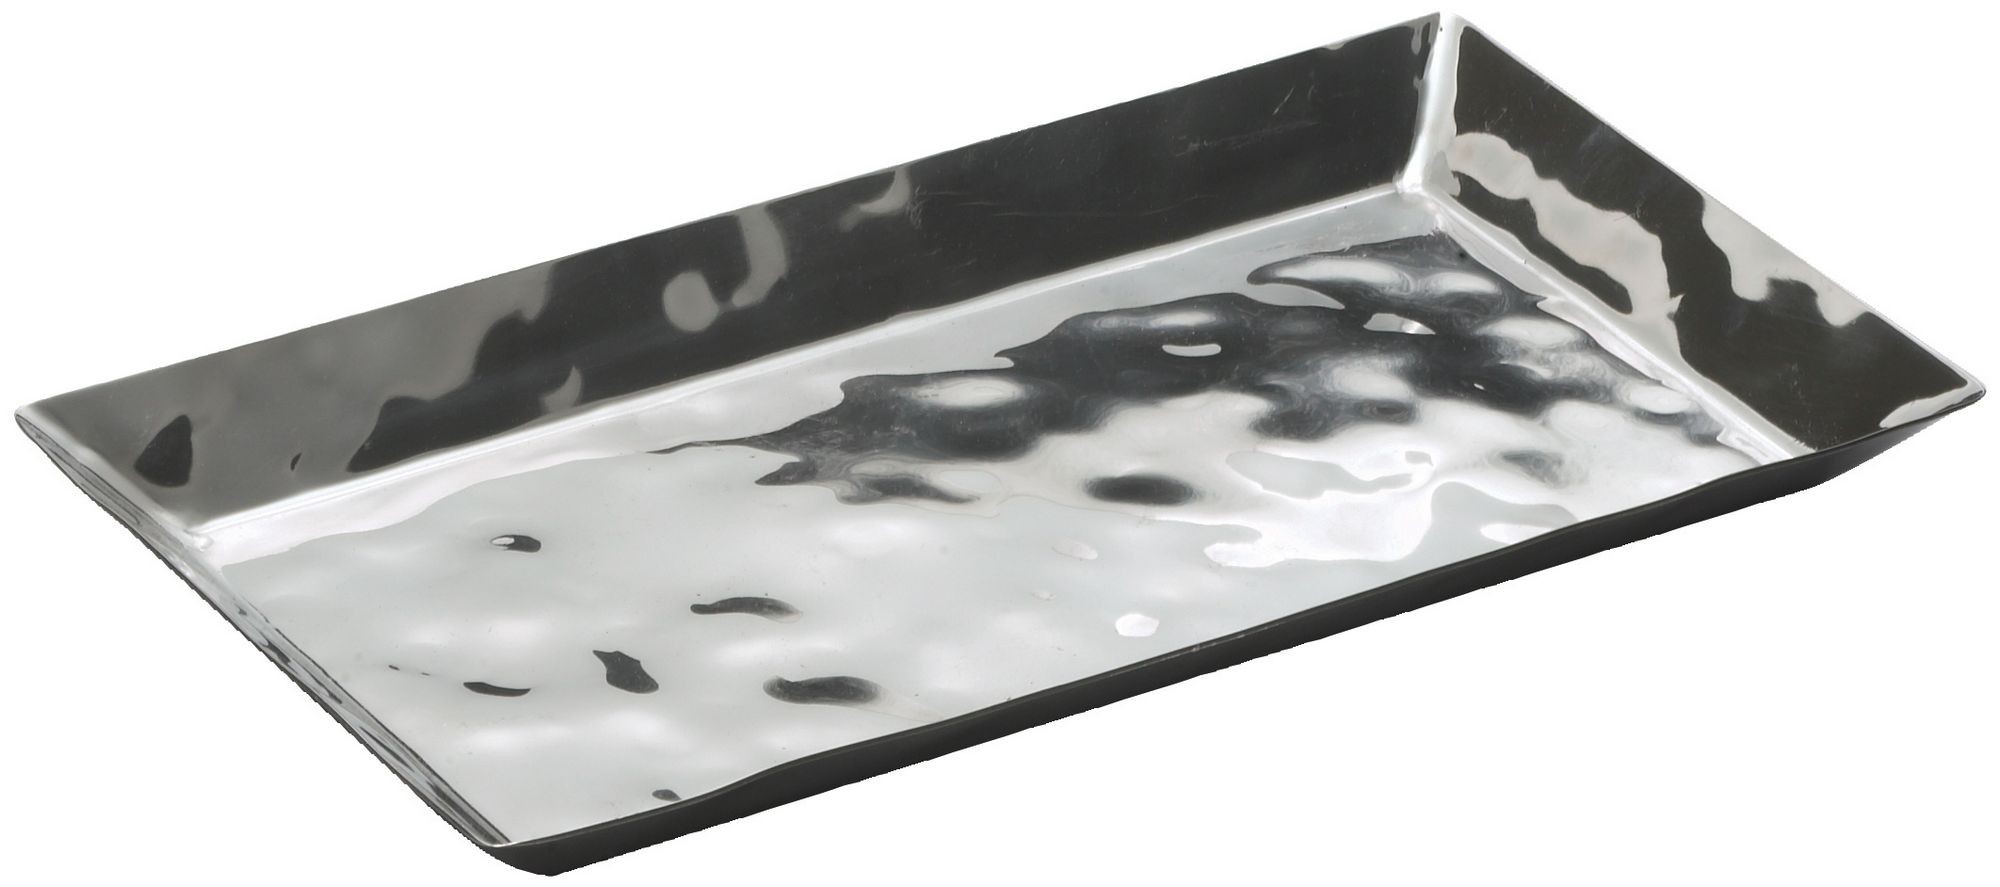 Winco HPO-14 Hammered Steel Oblong Serving / Display Tray, 13-3/4" x 7-3/4" x 1"